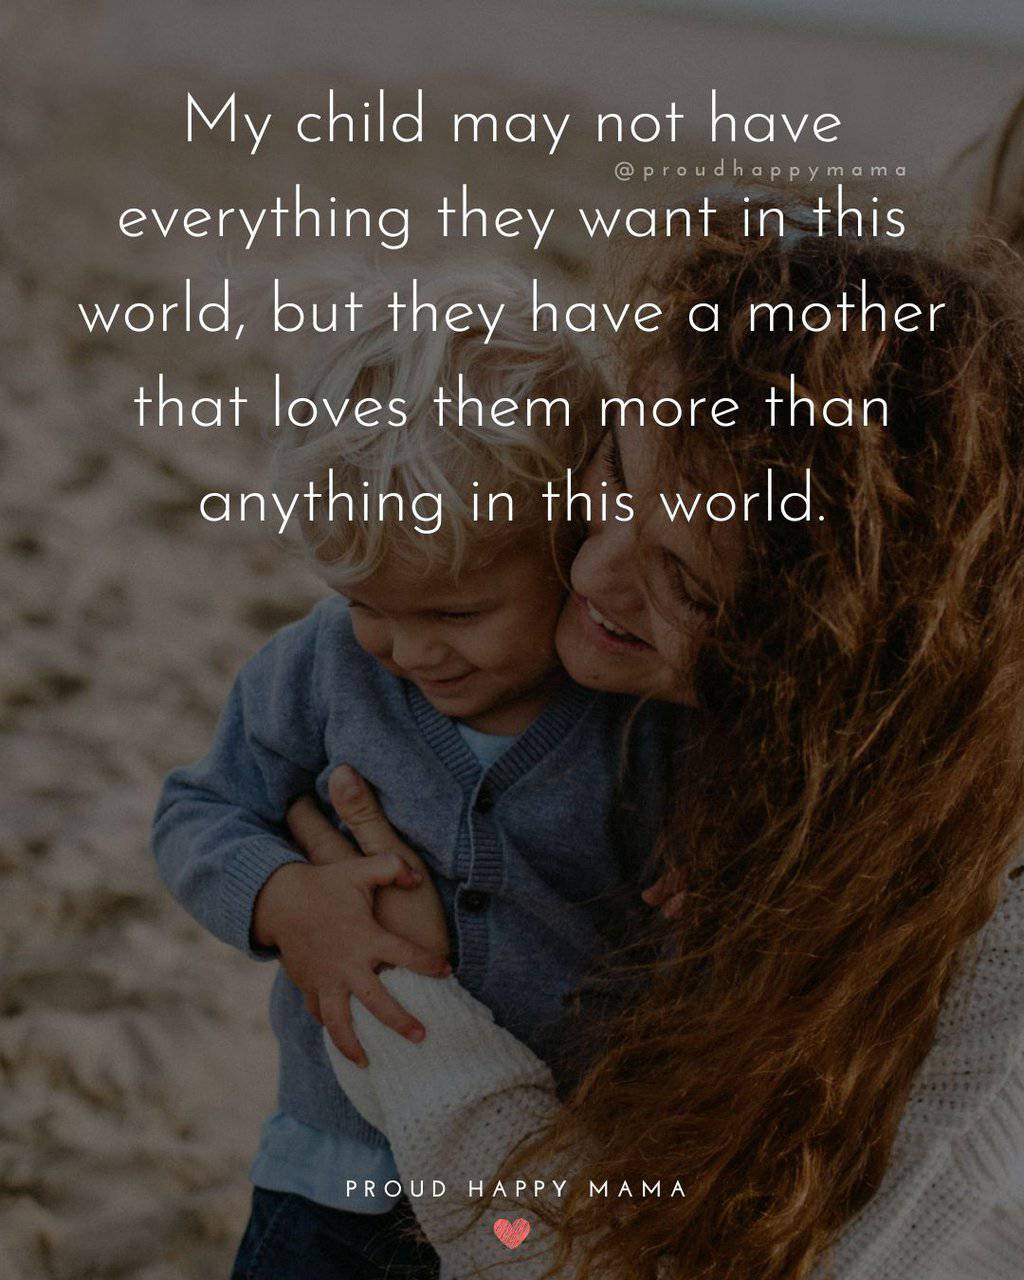 Loving children quotes. My child may not have everything they want in this world, but they have a mother that loves them more than anything in this world.